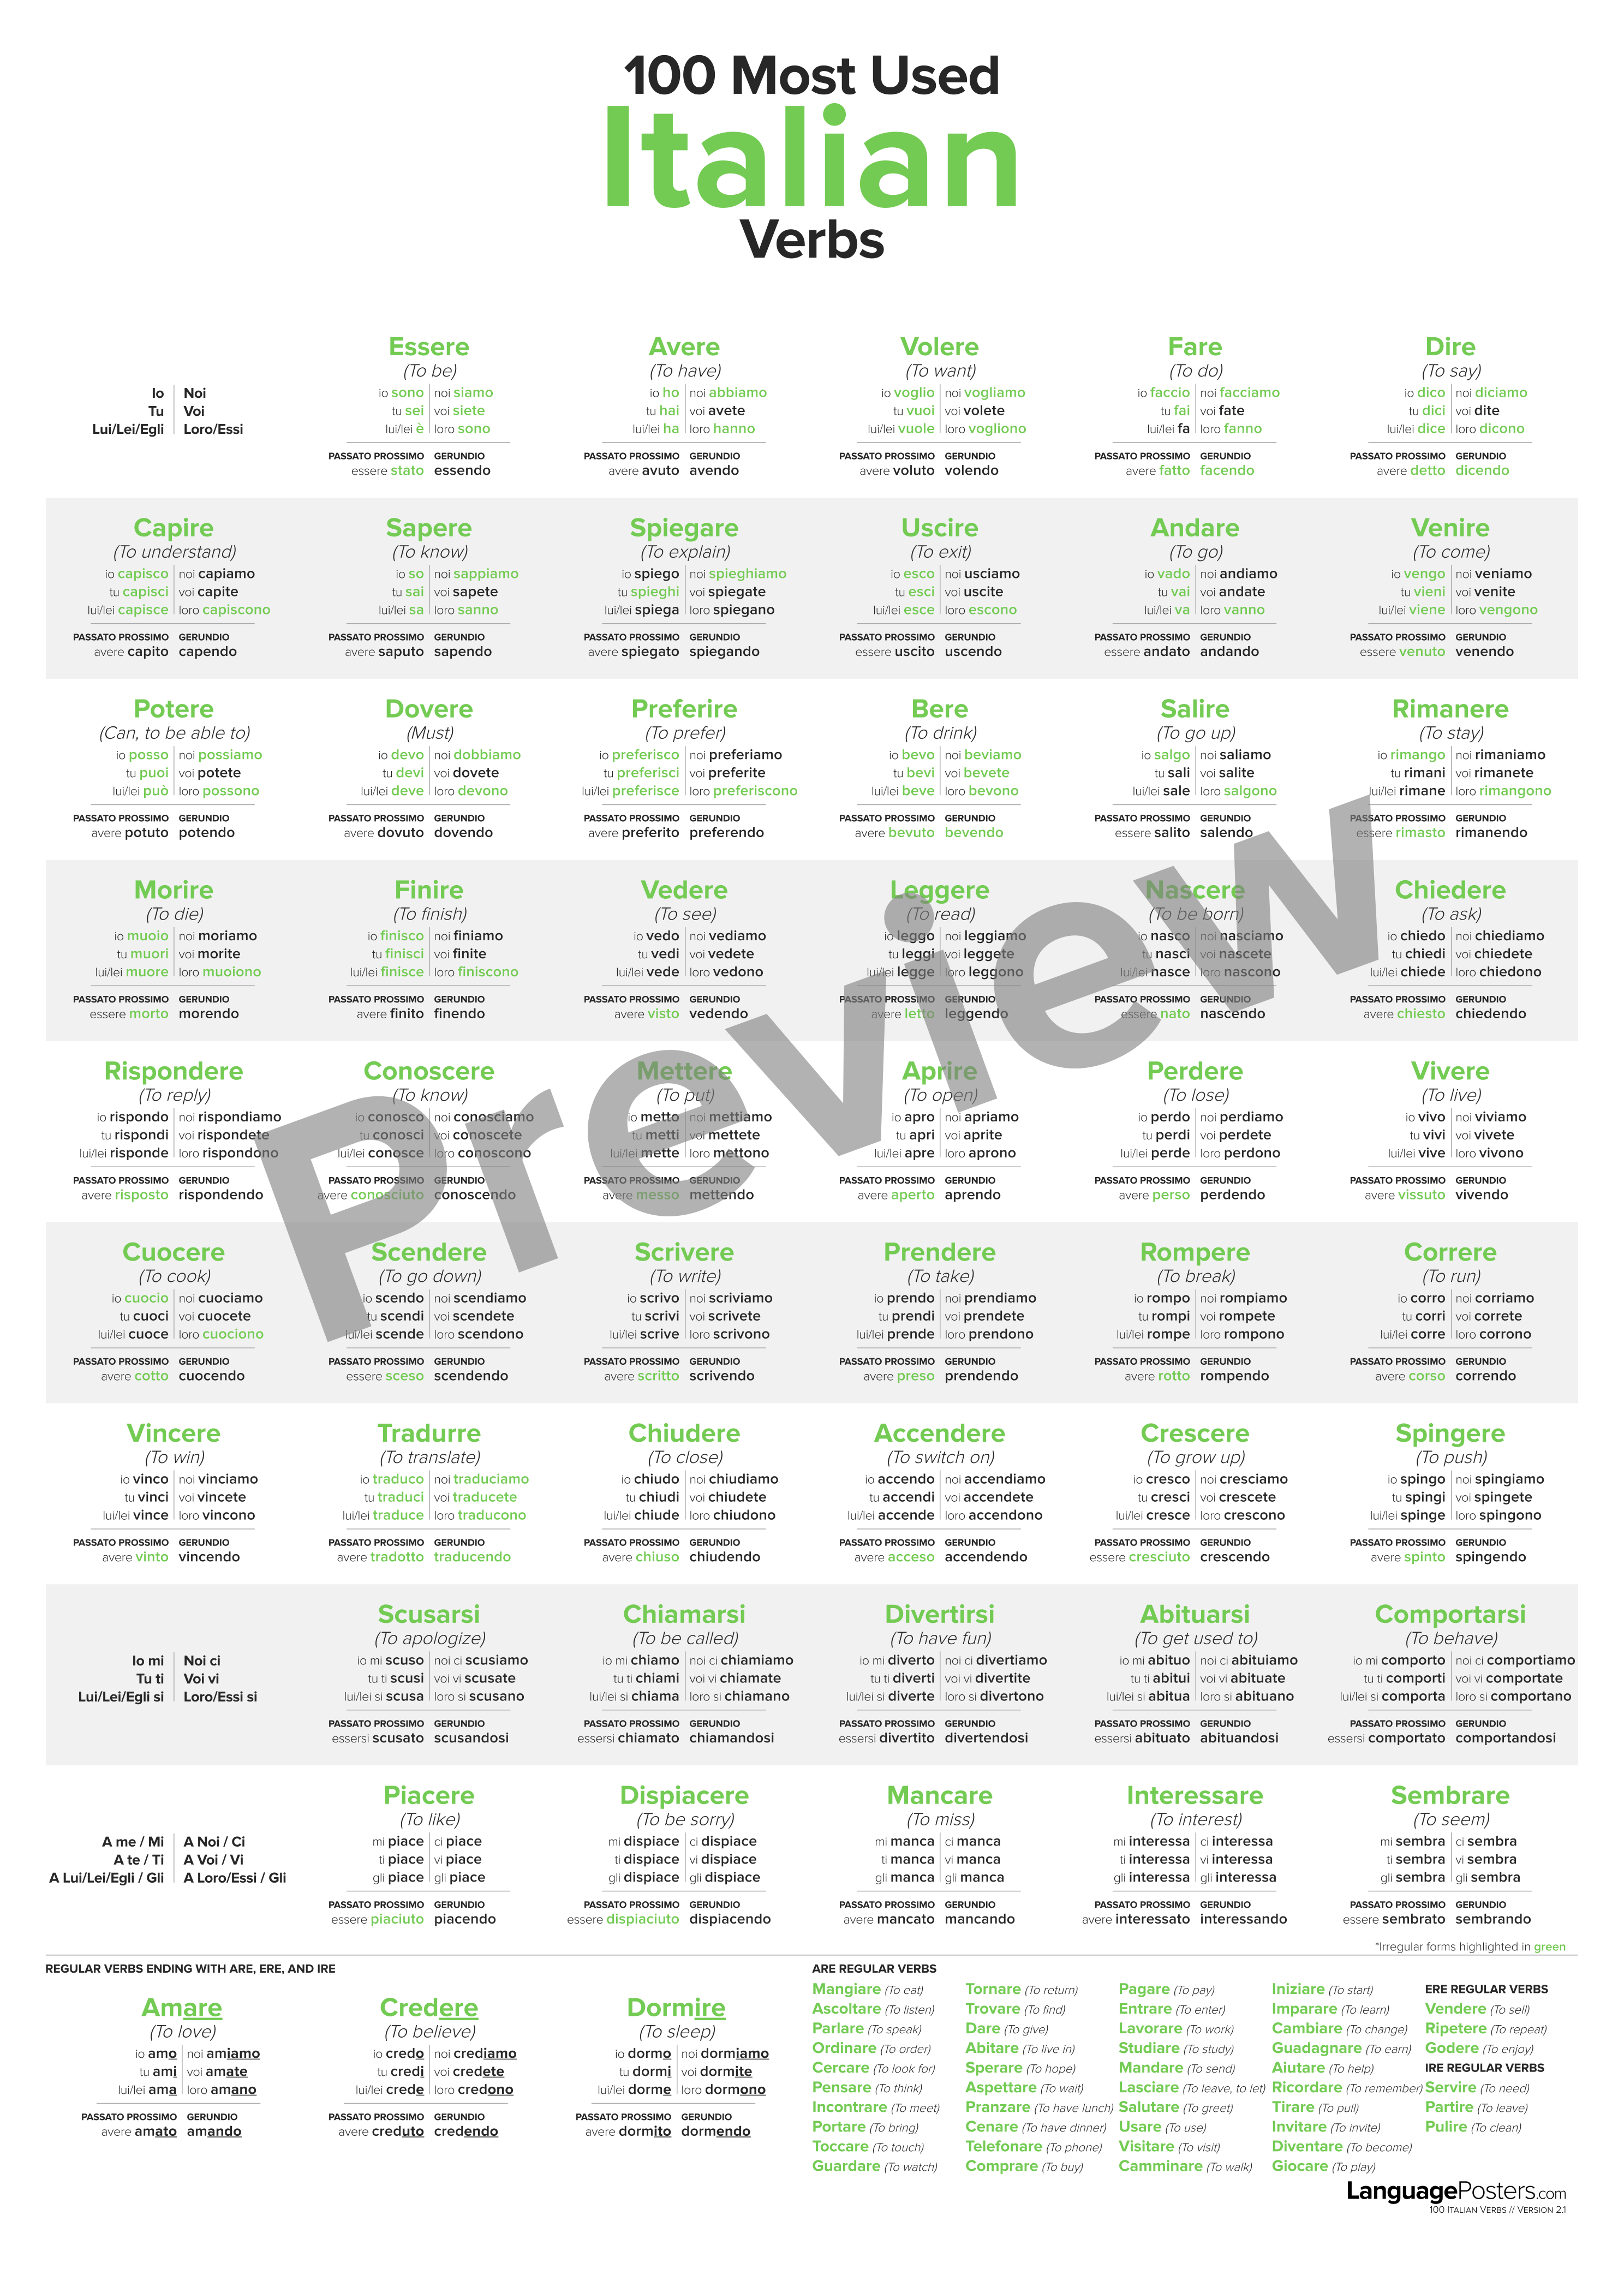 100 Most Used Italian Verbs Poster Preview - LanguagePosters.com